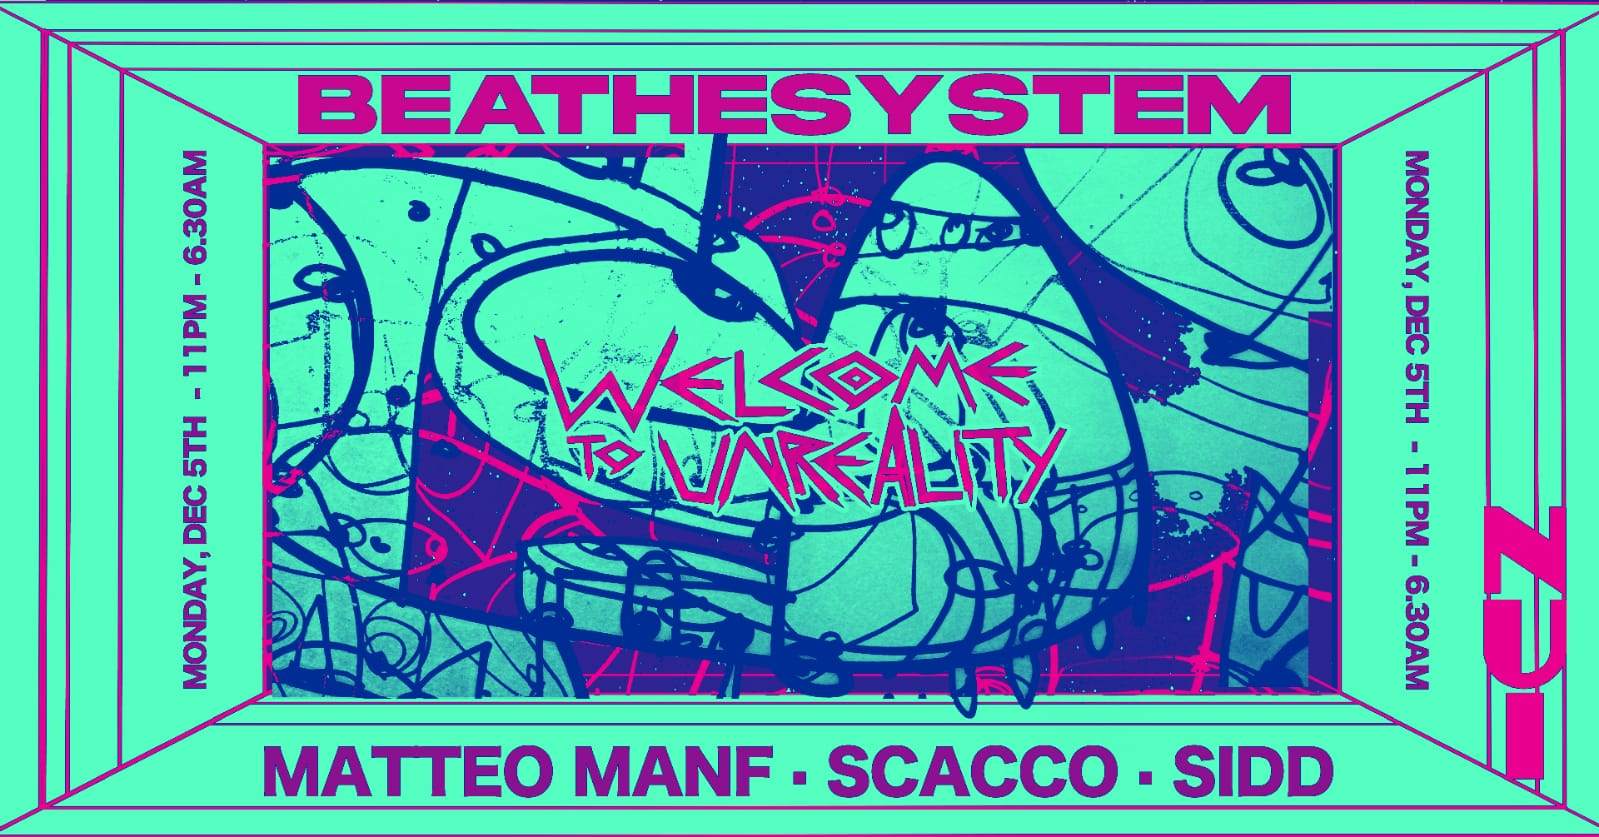 BeaTheSystem with Matteo Manf, Scacco, Sidd at Nui - Página frontal